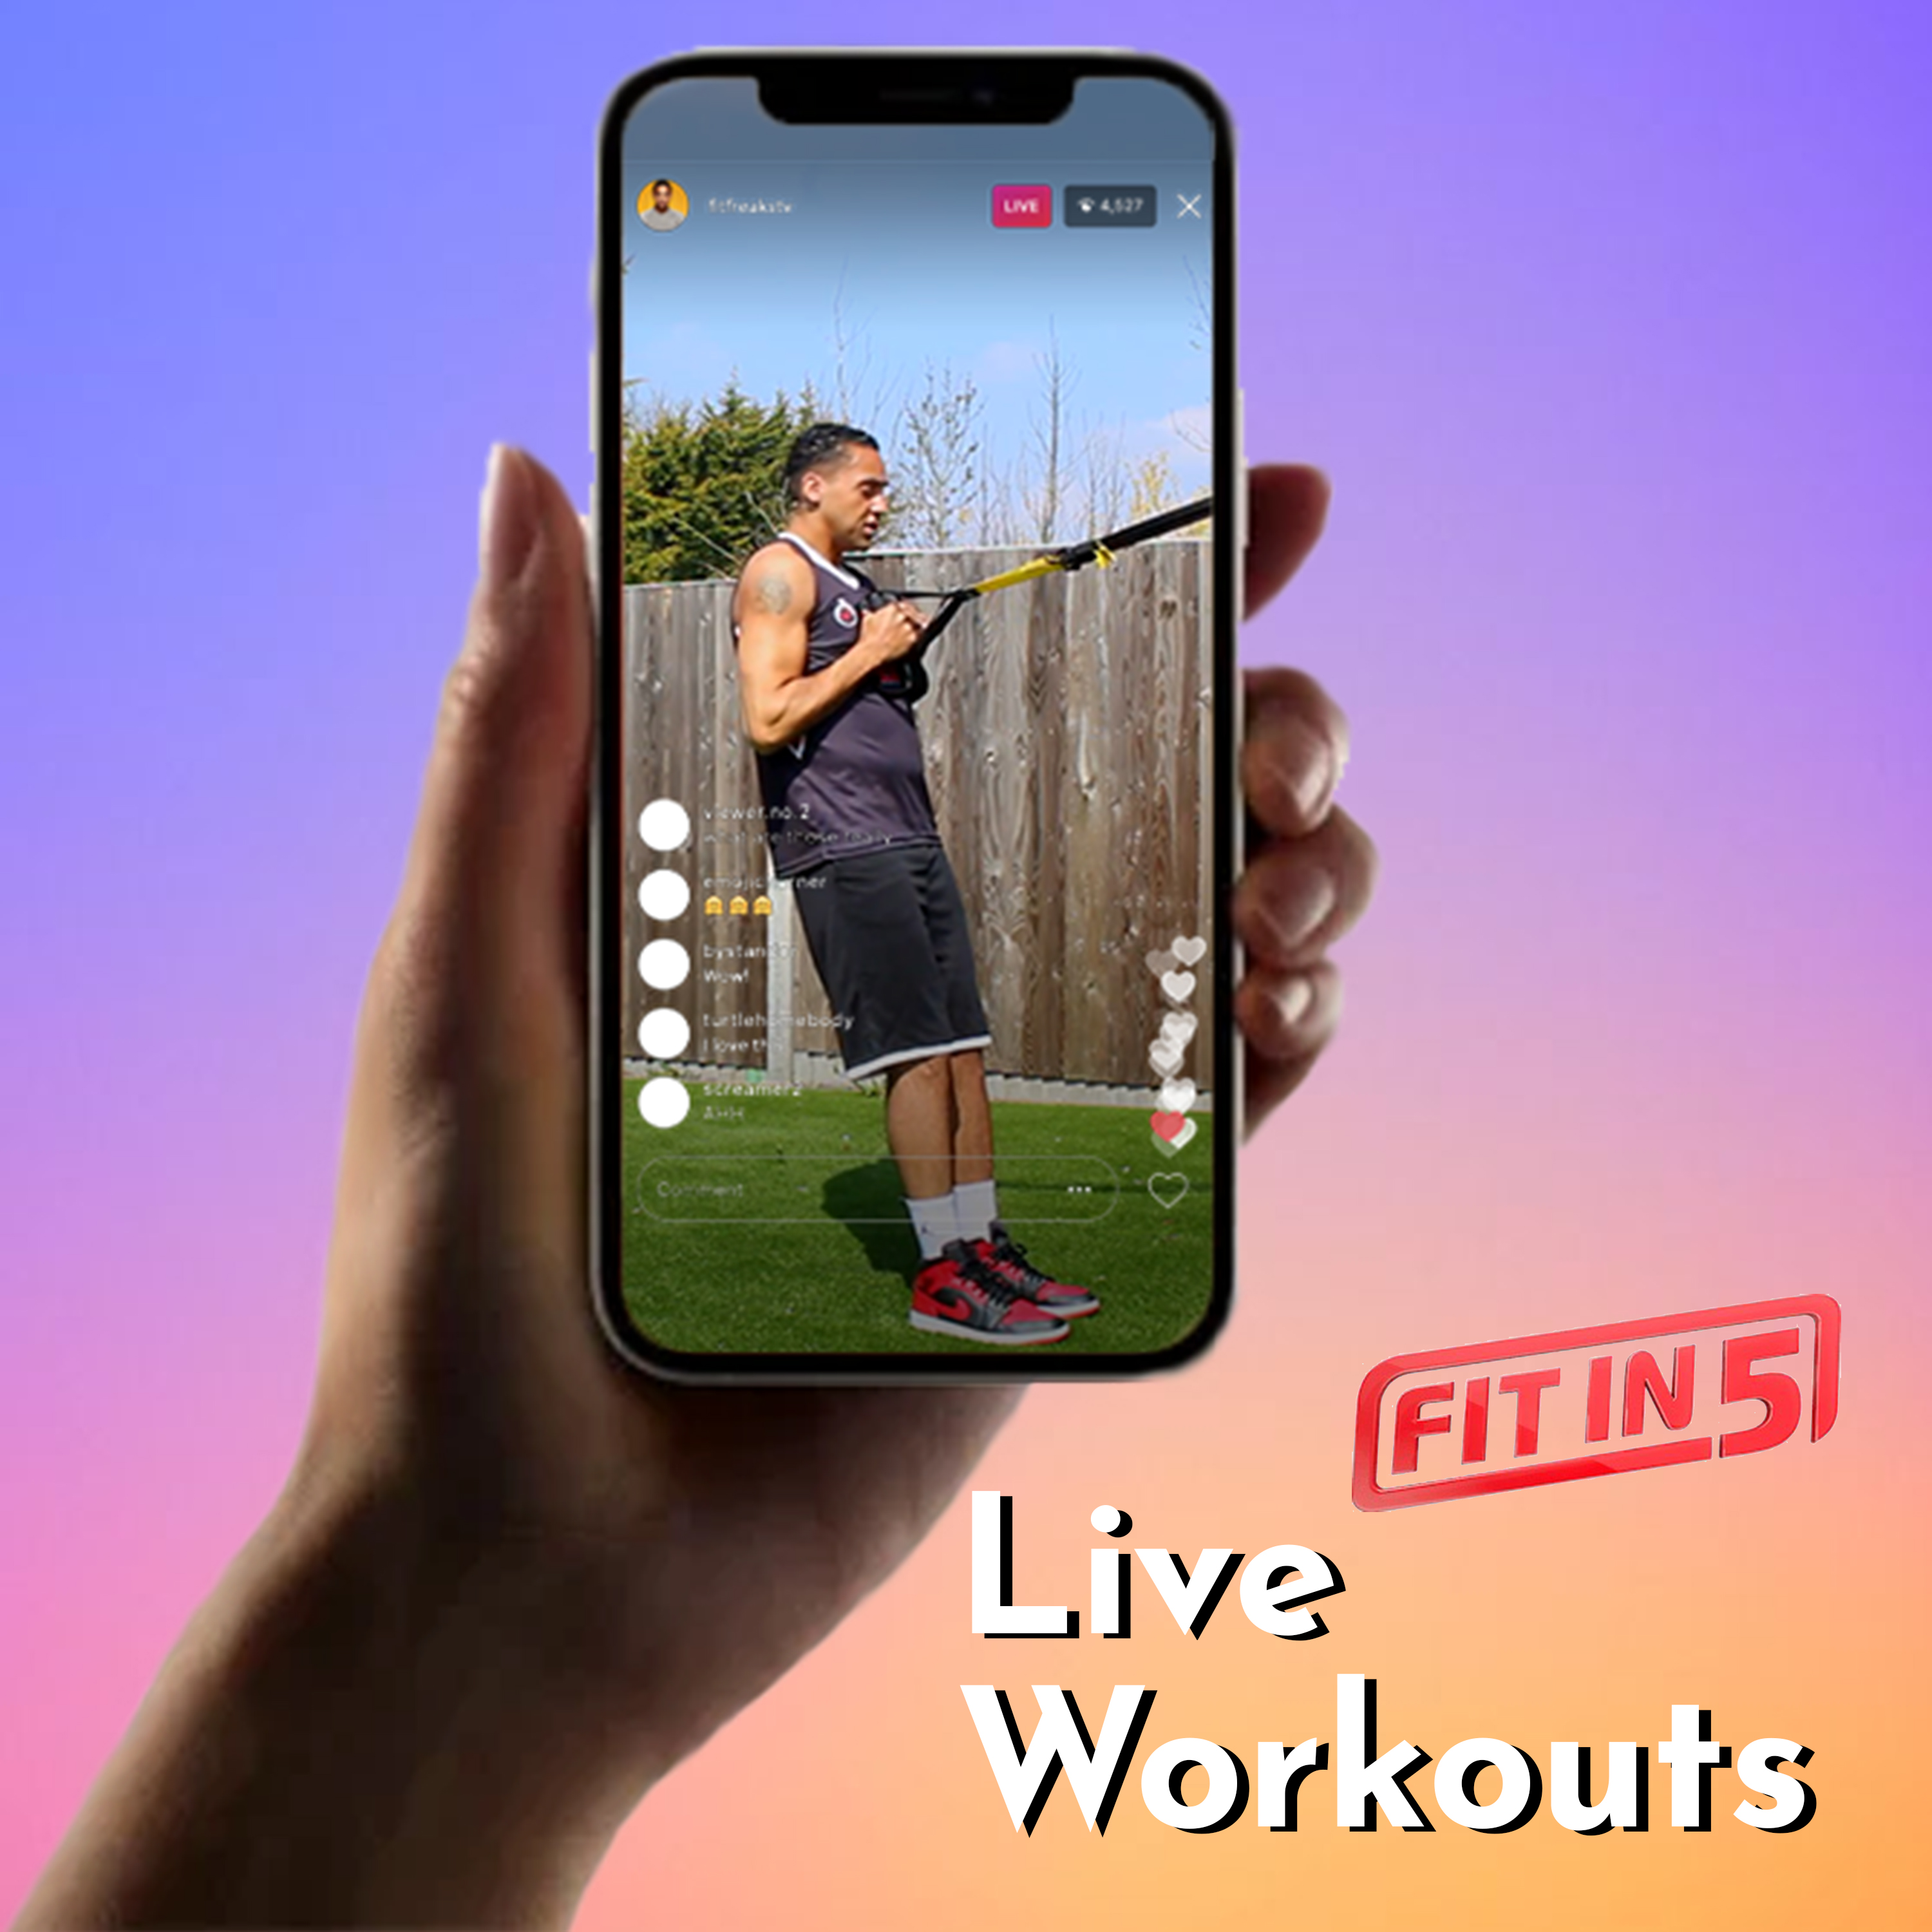 Live workouts with marvin ambrosius